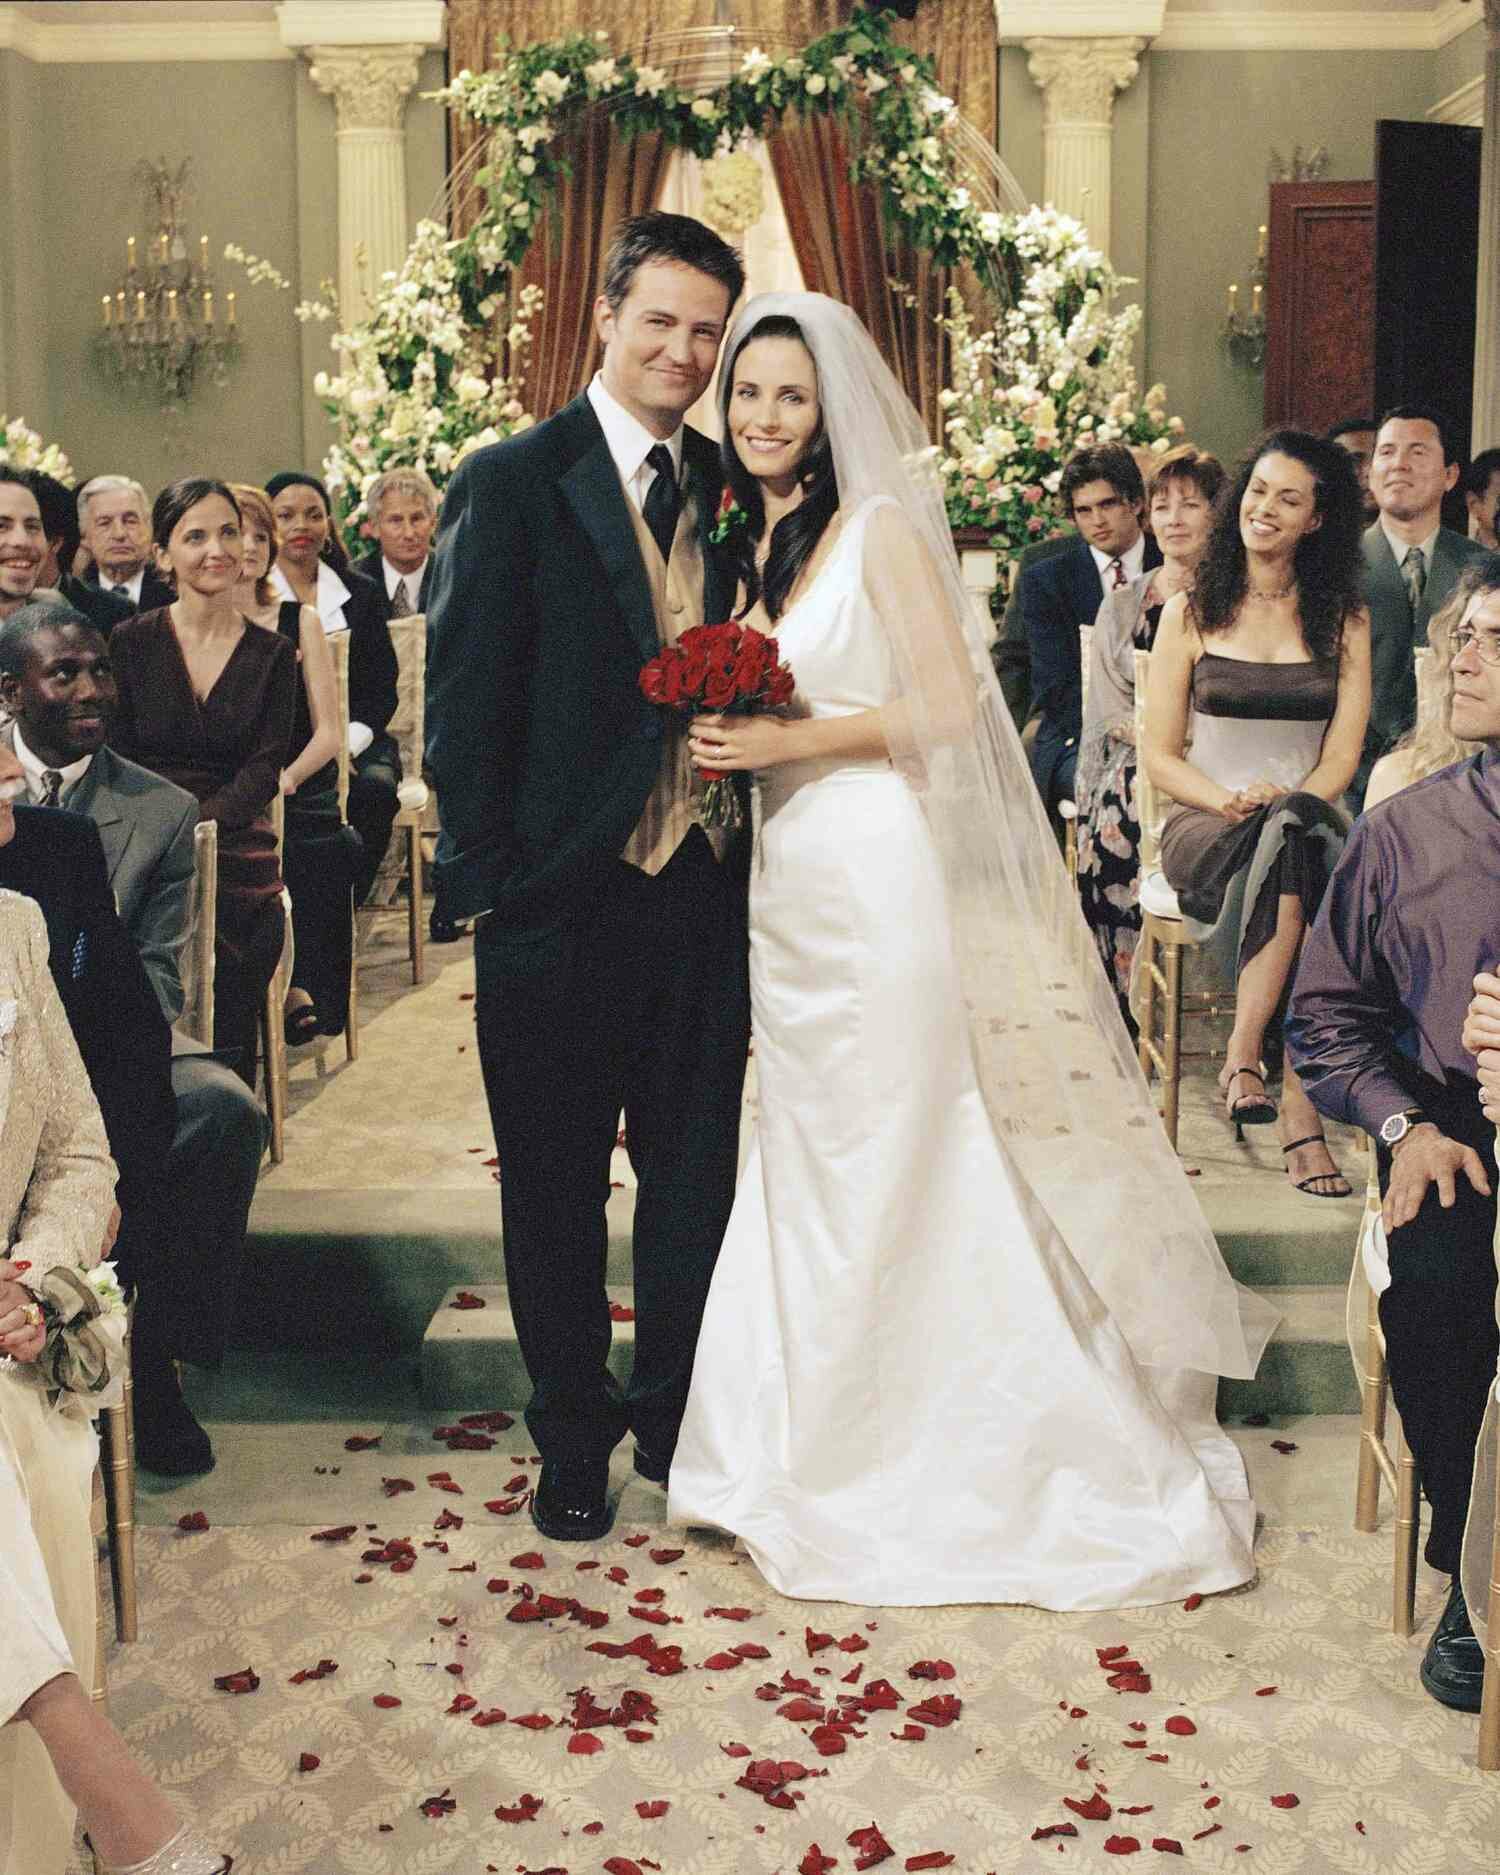 Chandler Bing and Monica Geller in Wedding Attire Posing in Aisle at Their Wedding "The One With Monica And Chandler's Wedding" Season 7, Episode 23